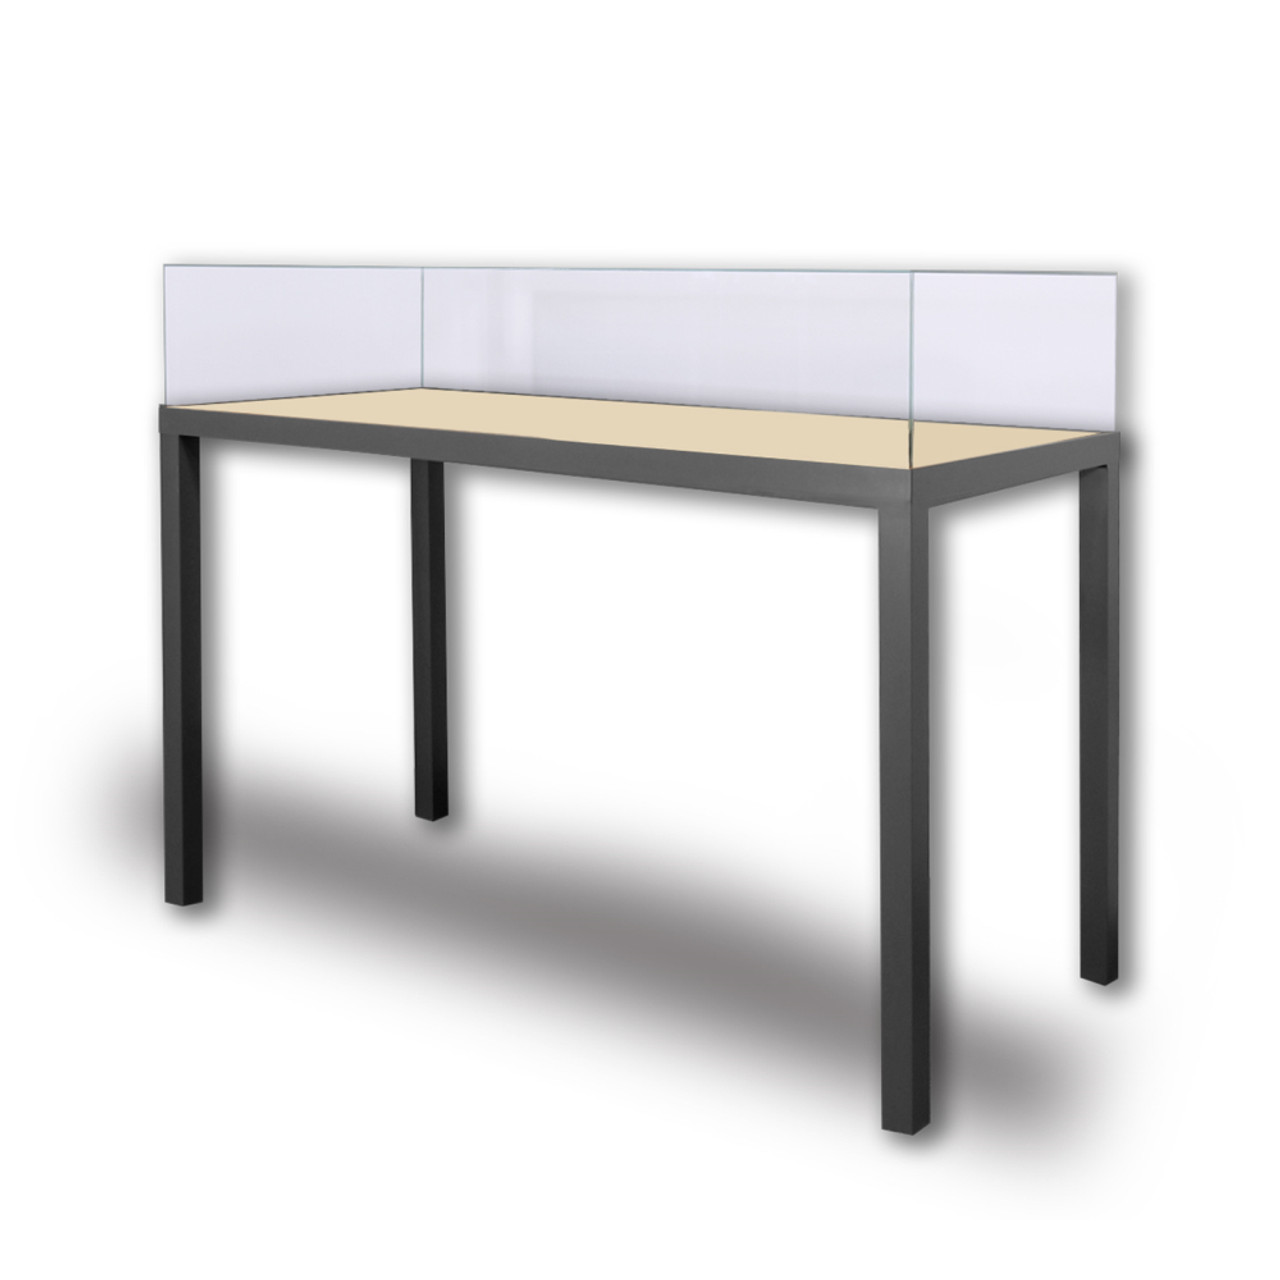 with Painted Table Case Leg Panel Vitrine Lift-Off